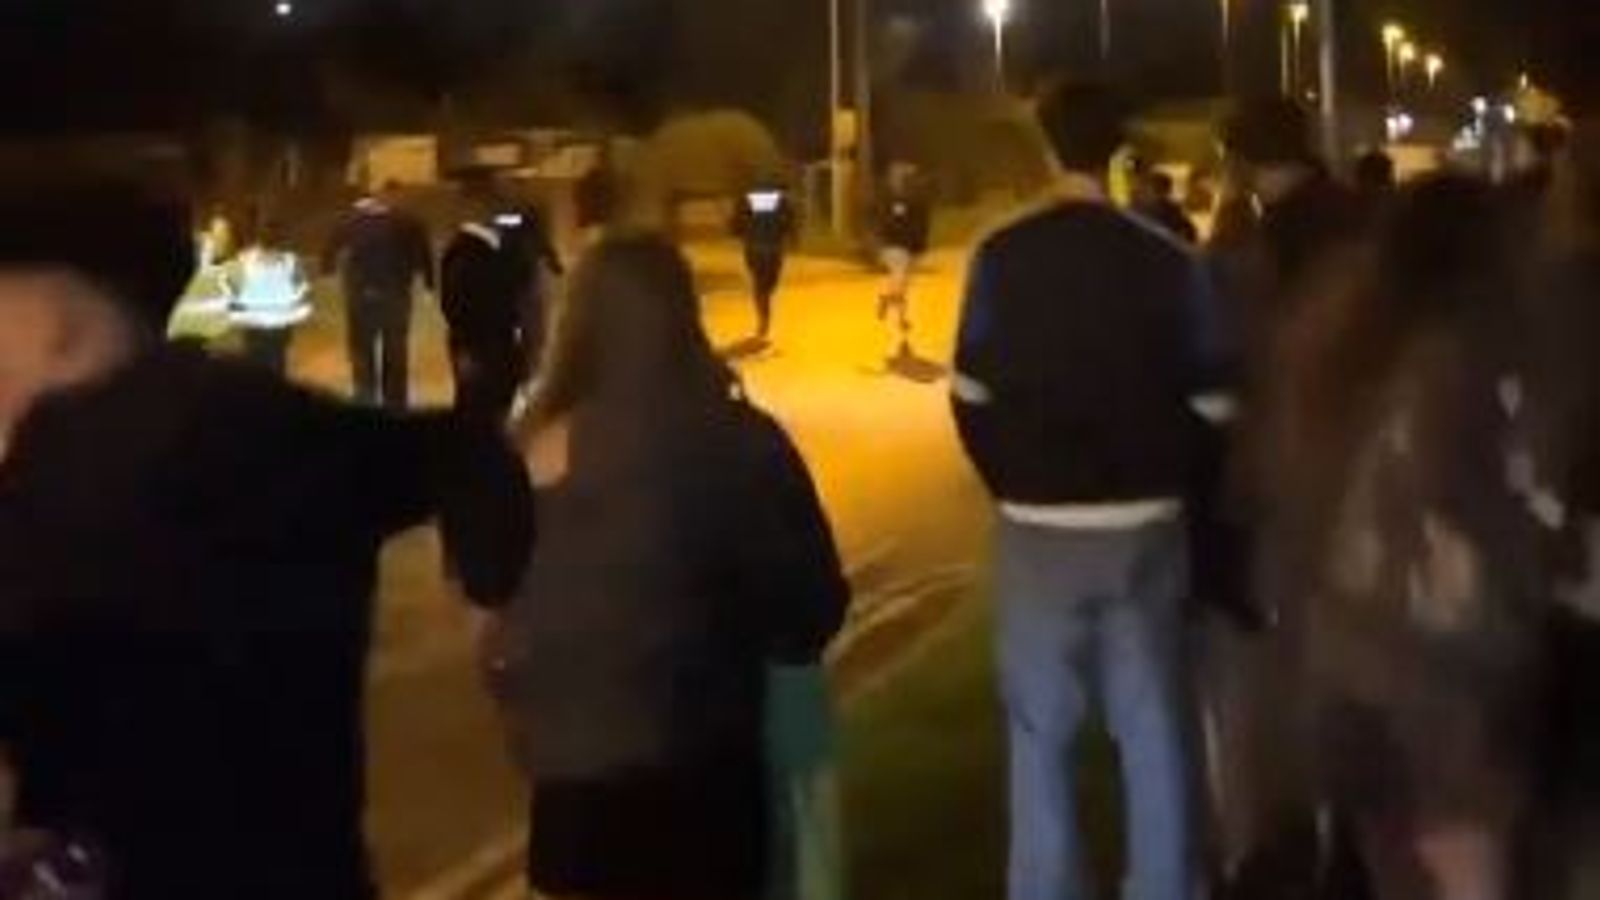 Worthing: Police appeal after hundreds of teens turn up to house party